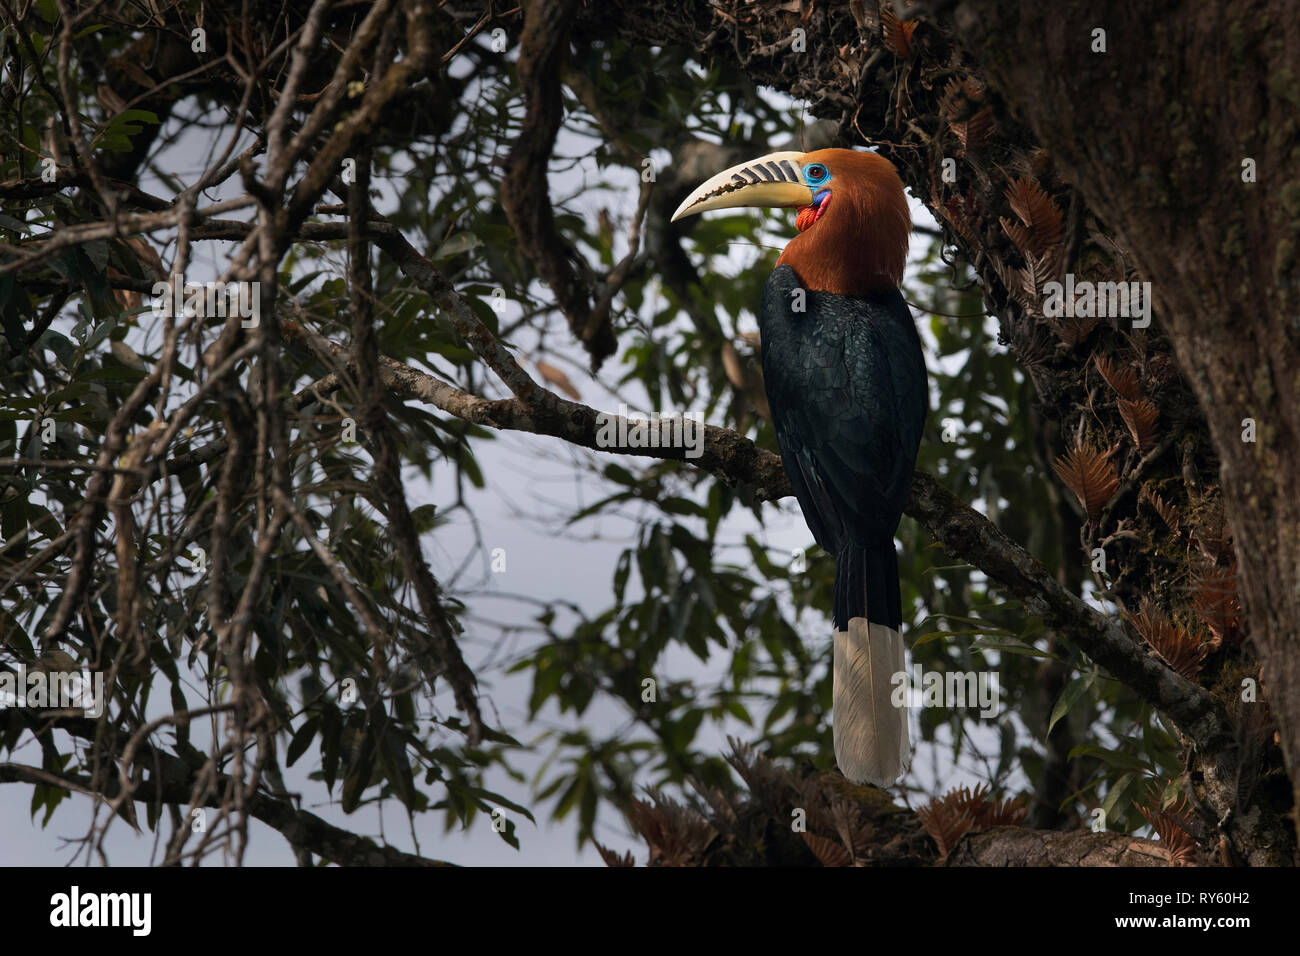 The image of Rufous-necked hornbill (Aceros nipalensis)  in Latpanchor, Darjeeling, West Bengal, India Stock Photo